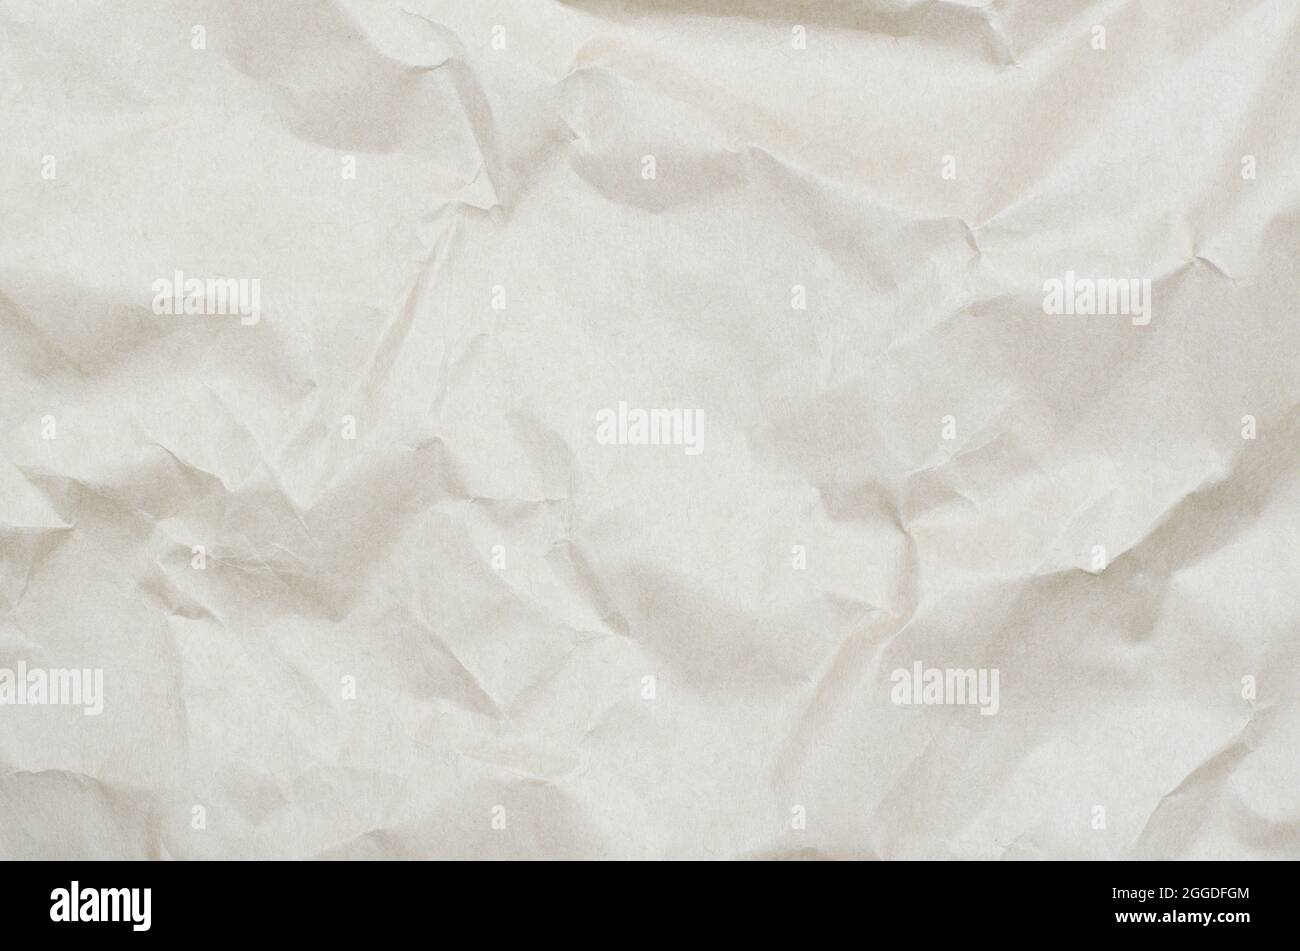 Background from crumpled beige paper. Texture of crumpled paper Stock Photo